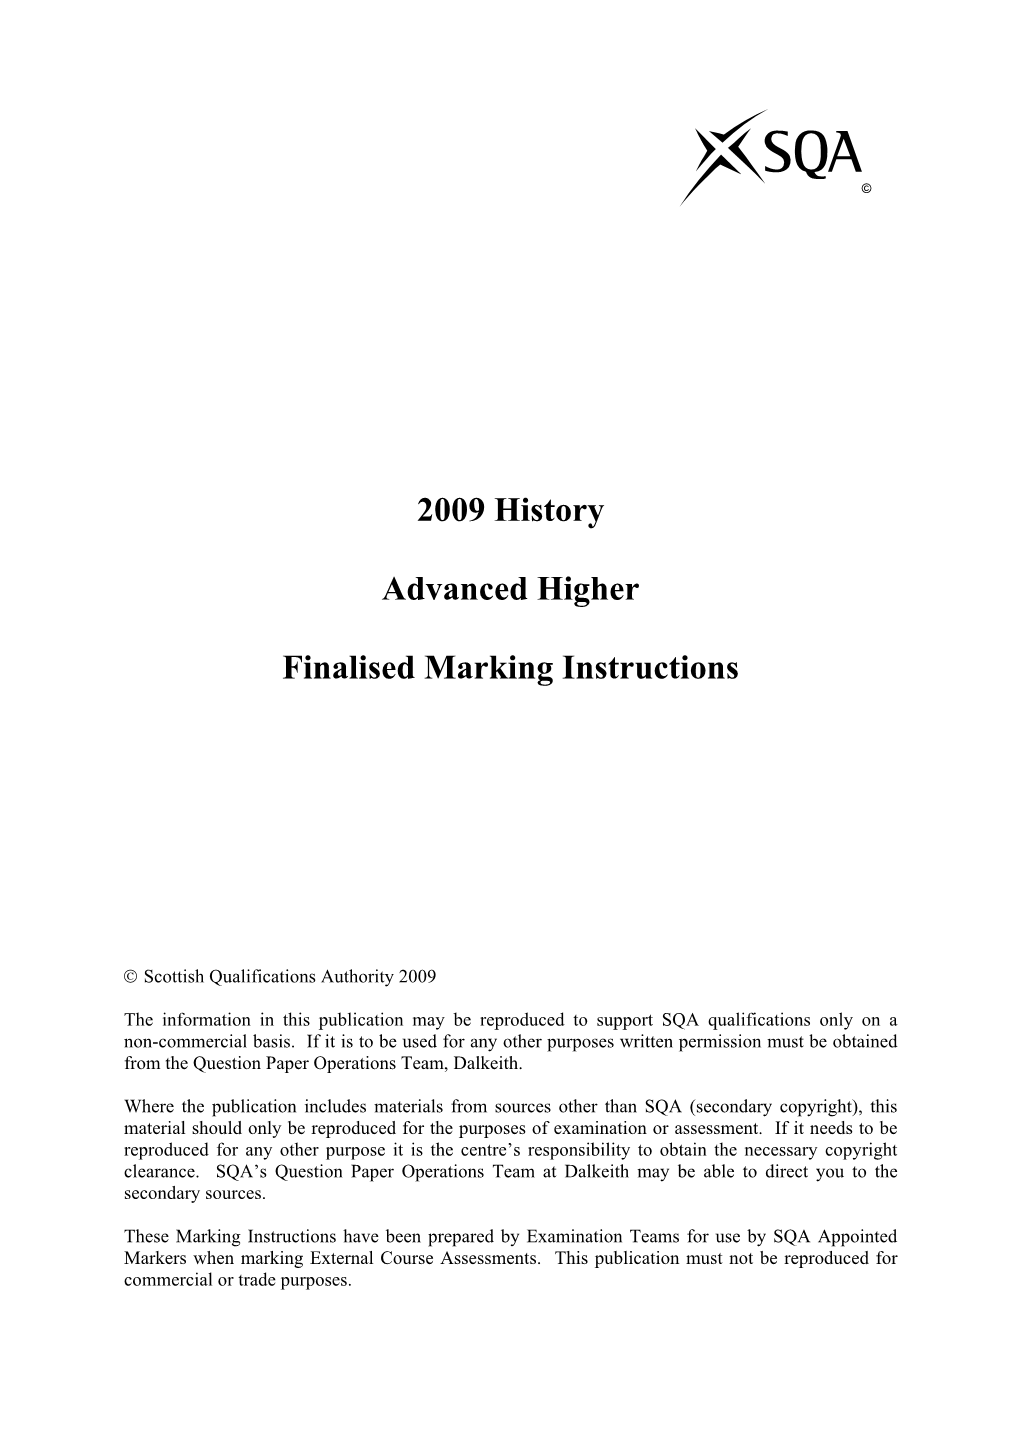 2009 History Advanced Higher Finalised Marking Instructions